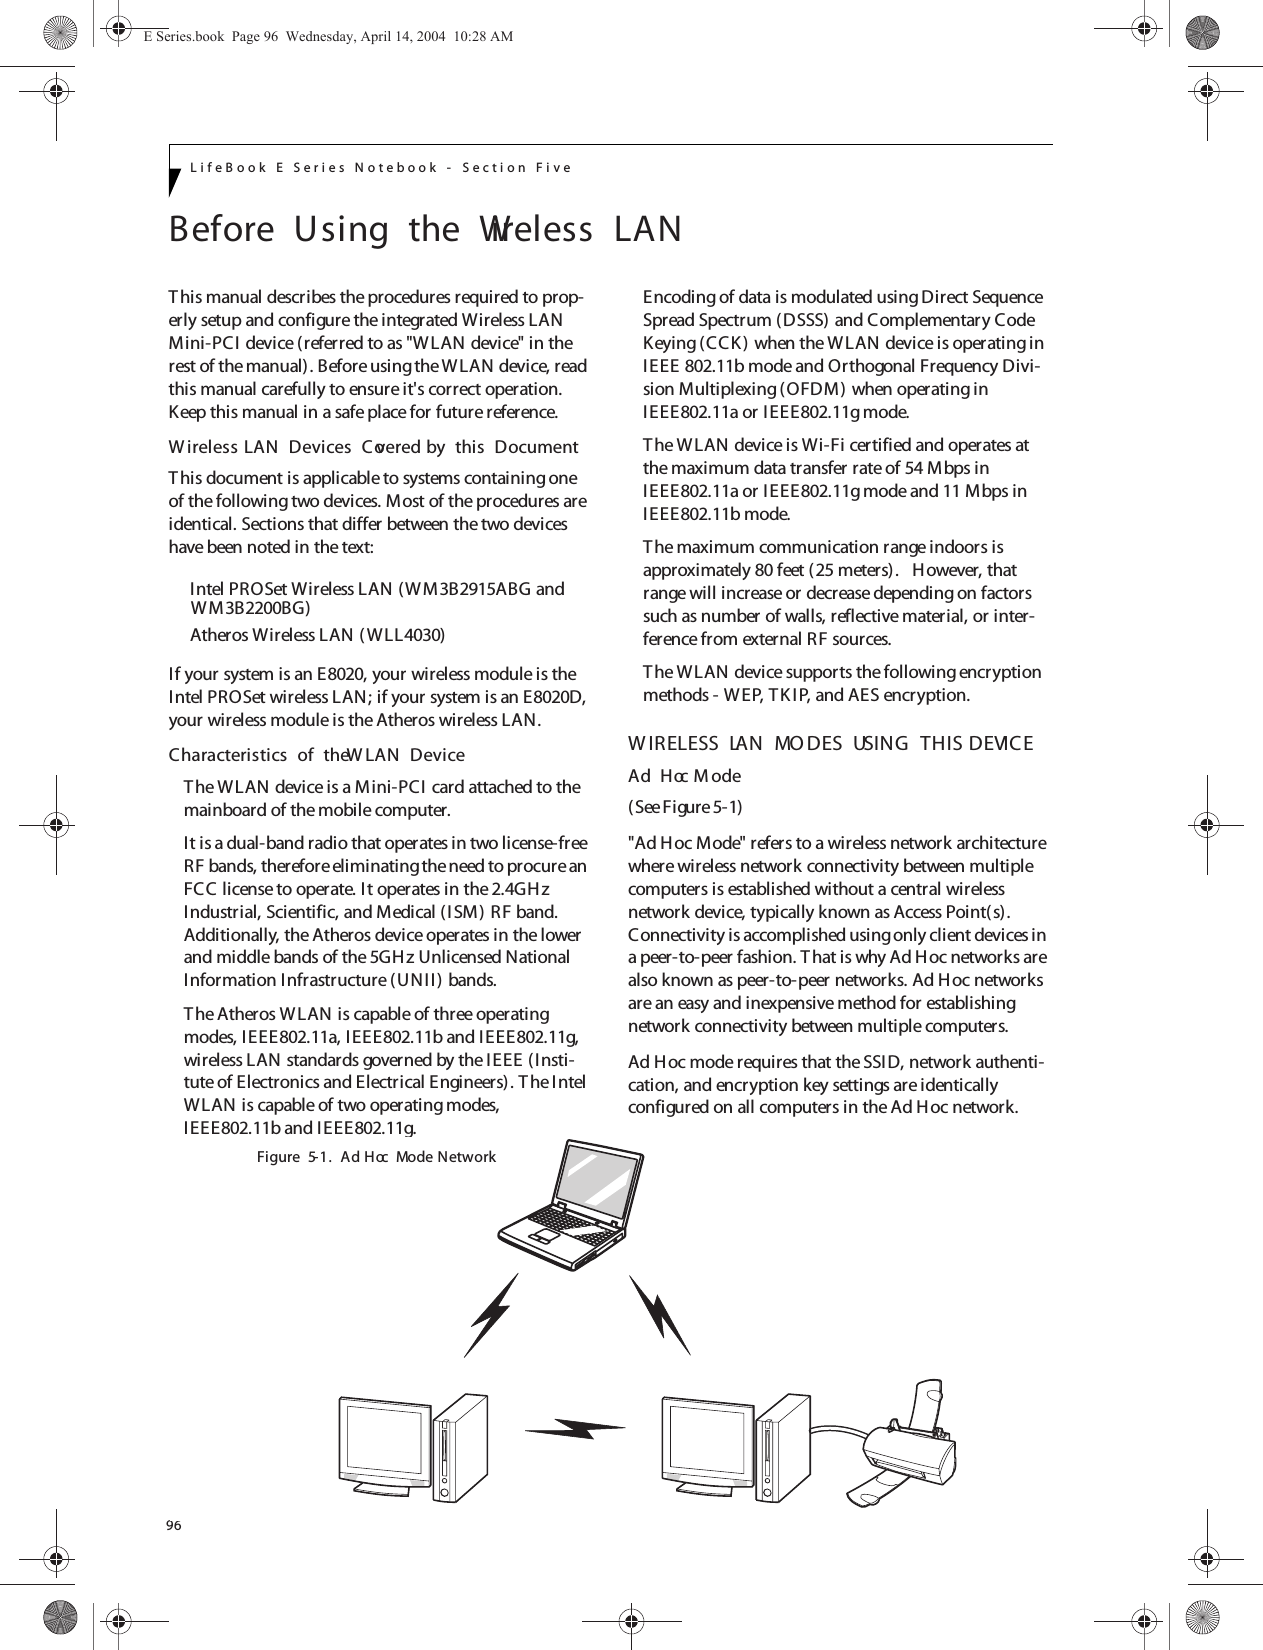 96LifeBook E Series Notebook - Section FiveBefore  Using  the  Wireless  LANThis manual describes the procedures required to prop-erly setup and configure the integrated Wireless LAN Mini-PCI device (referred to as &quot;W LAN device&quot; in the rest of the manual). Before using the WLAN device, read this manual carefully to ensure it&apos;s correct operation. Keep this manual in a safe place for future reference.W ireless LAN  Devices  Covered by  this  DocumentThis document is applicable to systems containing one of the following two devices. Most of the procedures are identical. Sections that differ between the two devices have been noted in the text:Intel PROSet Wireless LAN (WM3B2915ABG andAtheros Wireless LAN ( W LL4030)If your system is an E8020, your wireless module is the Intel PROSet wireless LAN; if your system is an E8020D, your wireless module is the Atheros wireless LAN.Characteristics  of  the W LAN  DeviceThe WLAN device is a Mini-PCI card attached to the mainboard of the mobile computer. It is a dual-band radio that operates in two license-free RF bands, therefore eliminating the need to procure an FCC license to operate. It operates in the 2.4GH z Industrial, Scientific, and Medical (ISM) RF band. Additionally, the Atheros device operates in the lower and middle bands of the 5GHz Unlicensed National Information Infrastructure ( UNII) bands. The Atheros WLAN is capable of three operating modes, I EEE802.11a, IEEE802.11b and IEEE802.11g, wireless LAN standards governed by the IEEE (Insti-tute of Electronics and Electrical Engineers). T he Intel WLAN is capable of two operating modes, IEEE802.11b and I EEE802.11g.Encoding of data is modulated using Direct Sequence Spread Spectrum (DSSS) and Complementary Code Keying (CCK) when the WLAN device is operating in IEEE 802.11b mode and Orthogonal Frequency Divi-sion Multiplexing (OFDM) when operating in IEEE802.11a or IEEE802.11g mode. The WLAN device is Wi-Fi certified and operates at the maximum data transfer rate of 54 Mbps in IEEE802.11a or IEEE802.11g mode and 11 Mbps in IEEE802.11b mode.The maximum communication range indoors is approximately 80 feet (25 meters).   However, that range will increase or decrease depending on factors such as number of walls, reflective material, or inter-ference from external RF sources.The WLAN device supports the following encryption methods - WEP, TK I P, and AES encryption.W IRELESS  LAN  MO DES  USING  THIS  DEVICEAd  Hoc M ode (See Figure 5-1)&quot;Ad Hoc Mode&quot; refers to a wireless network architecture where wireless network connectivity between multiple computers is established without a central wireless network device, typically known as Access Point(s). Connectivity is accomplished using only client devices in a peer-to-peer fashion. T hat is why Ad Hoc networks are also known as peer-to-peer networks. Ad Hoc networks are an easy and inexpensive method for establishing network connectivity between multiple computers.Ad Hoc mode requires that the SSID, network authenti-cation, and encryption key settings are identically configured on all computers in the Ad Hoc network. Figure  5-1.  Ad  Hoc  Mode NetworkE Series.book  Page 96  Wednesday, April 14, 2004  10:28 AMWM3B2200BG)